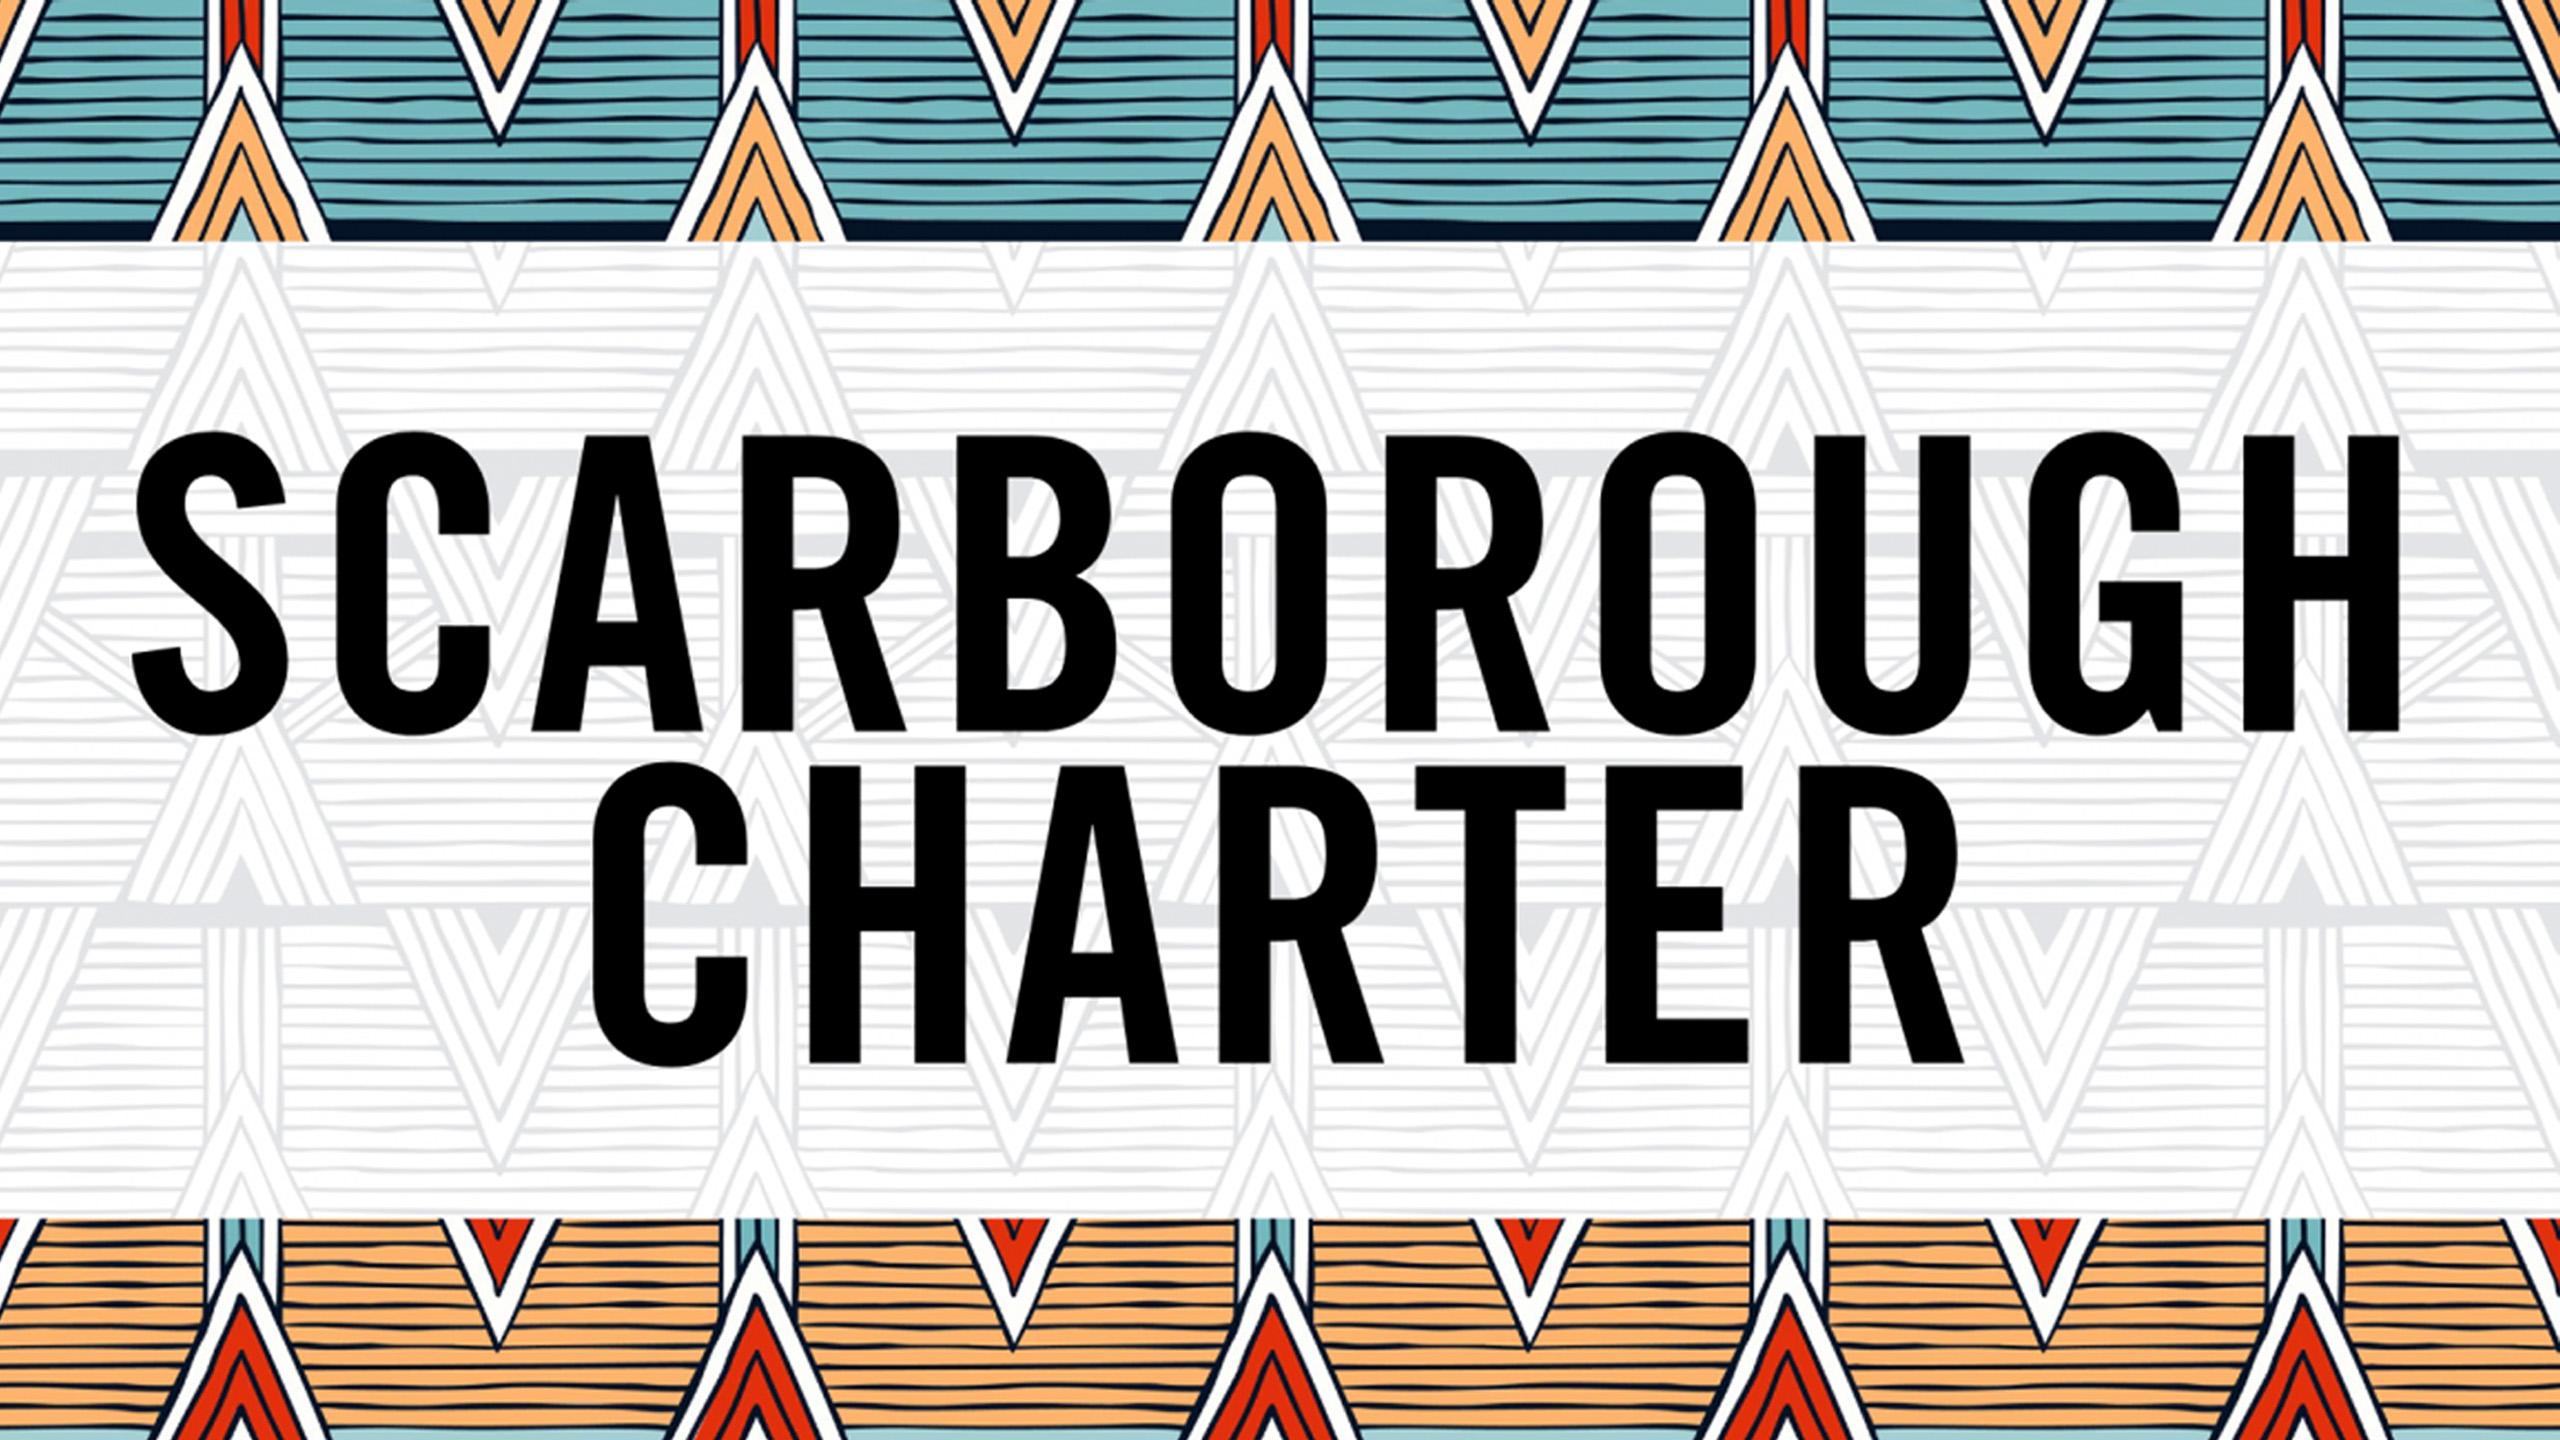 Image that says Scarborough Charter in Black letters with a white background in the centre, teal at the top and brown at the bottom.